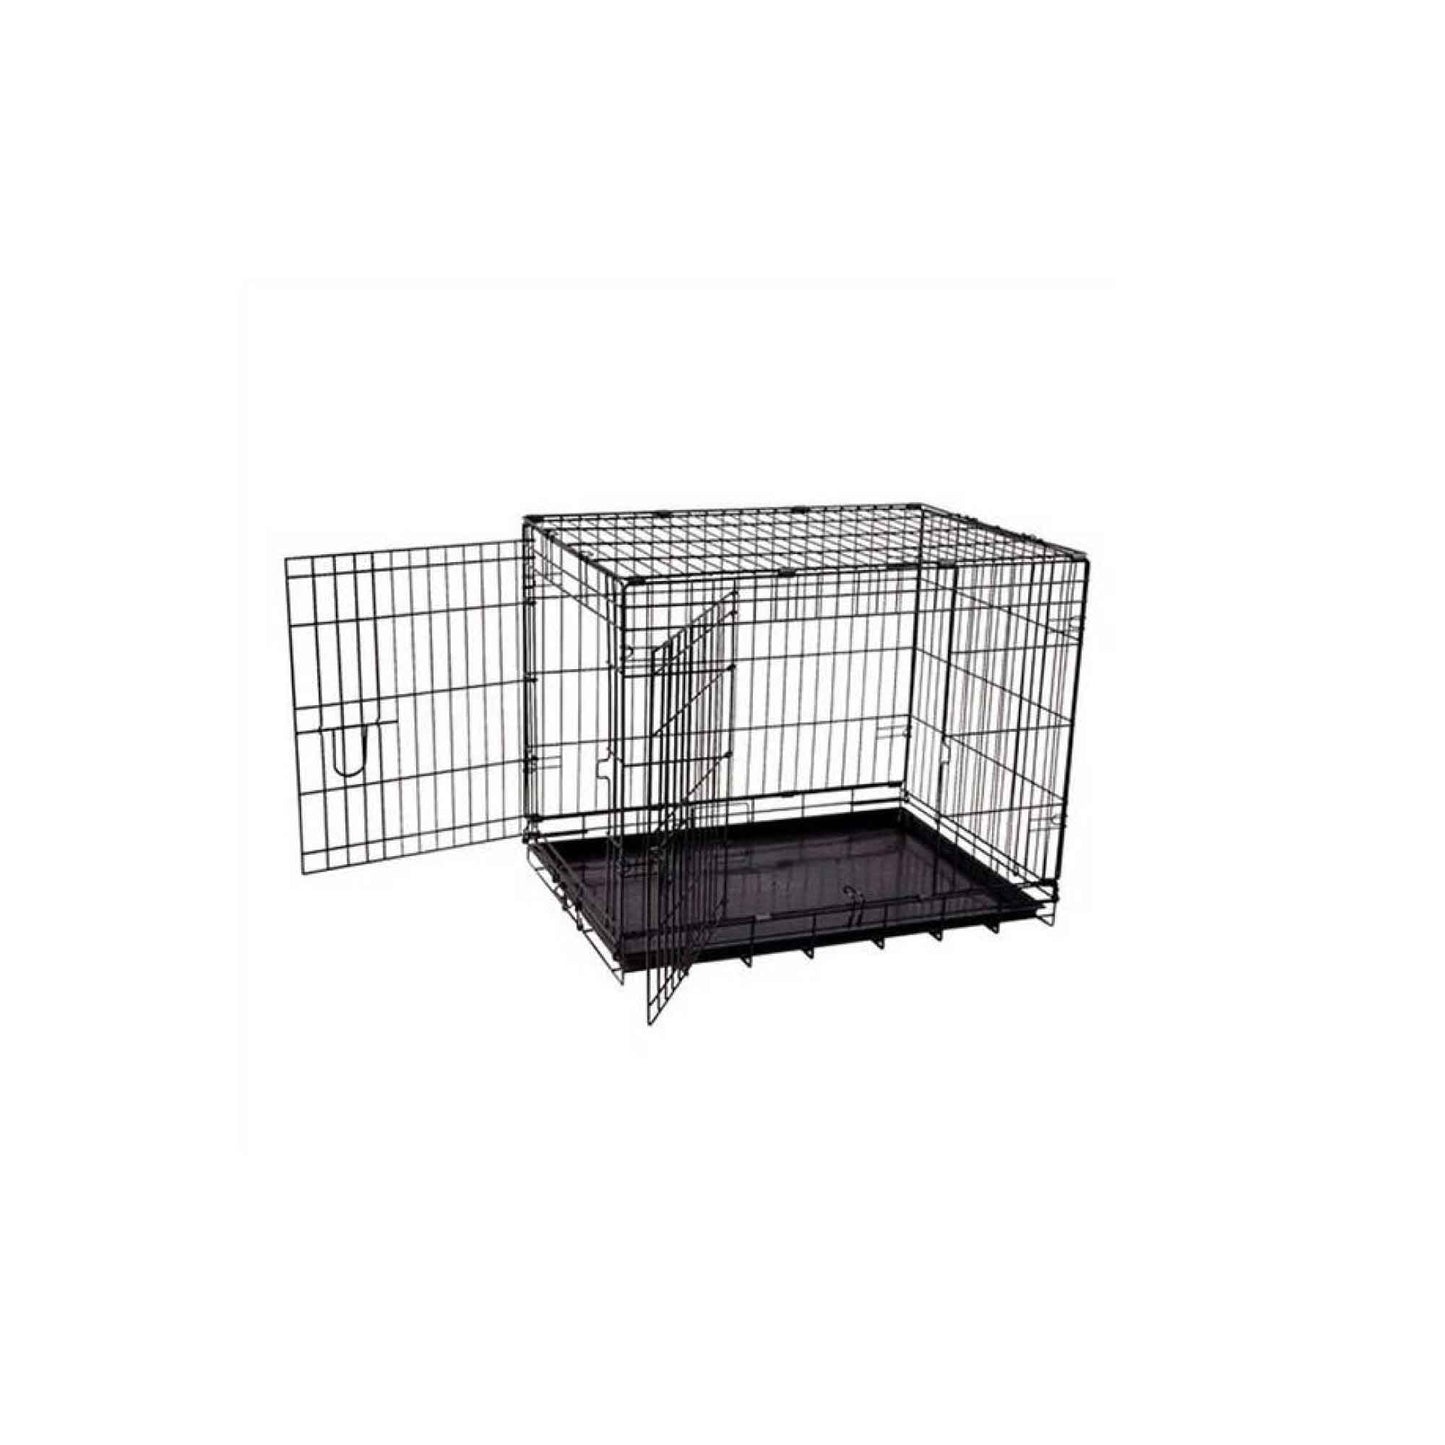 Dog Wire Crate Deluxe Bed Small Pet Puppy Portable Kennel Travel Training Cage